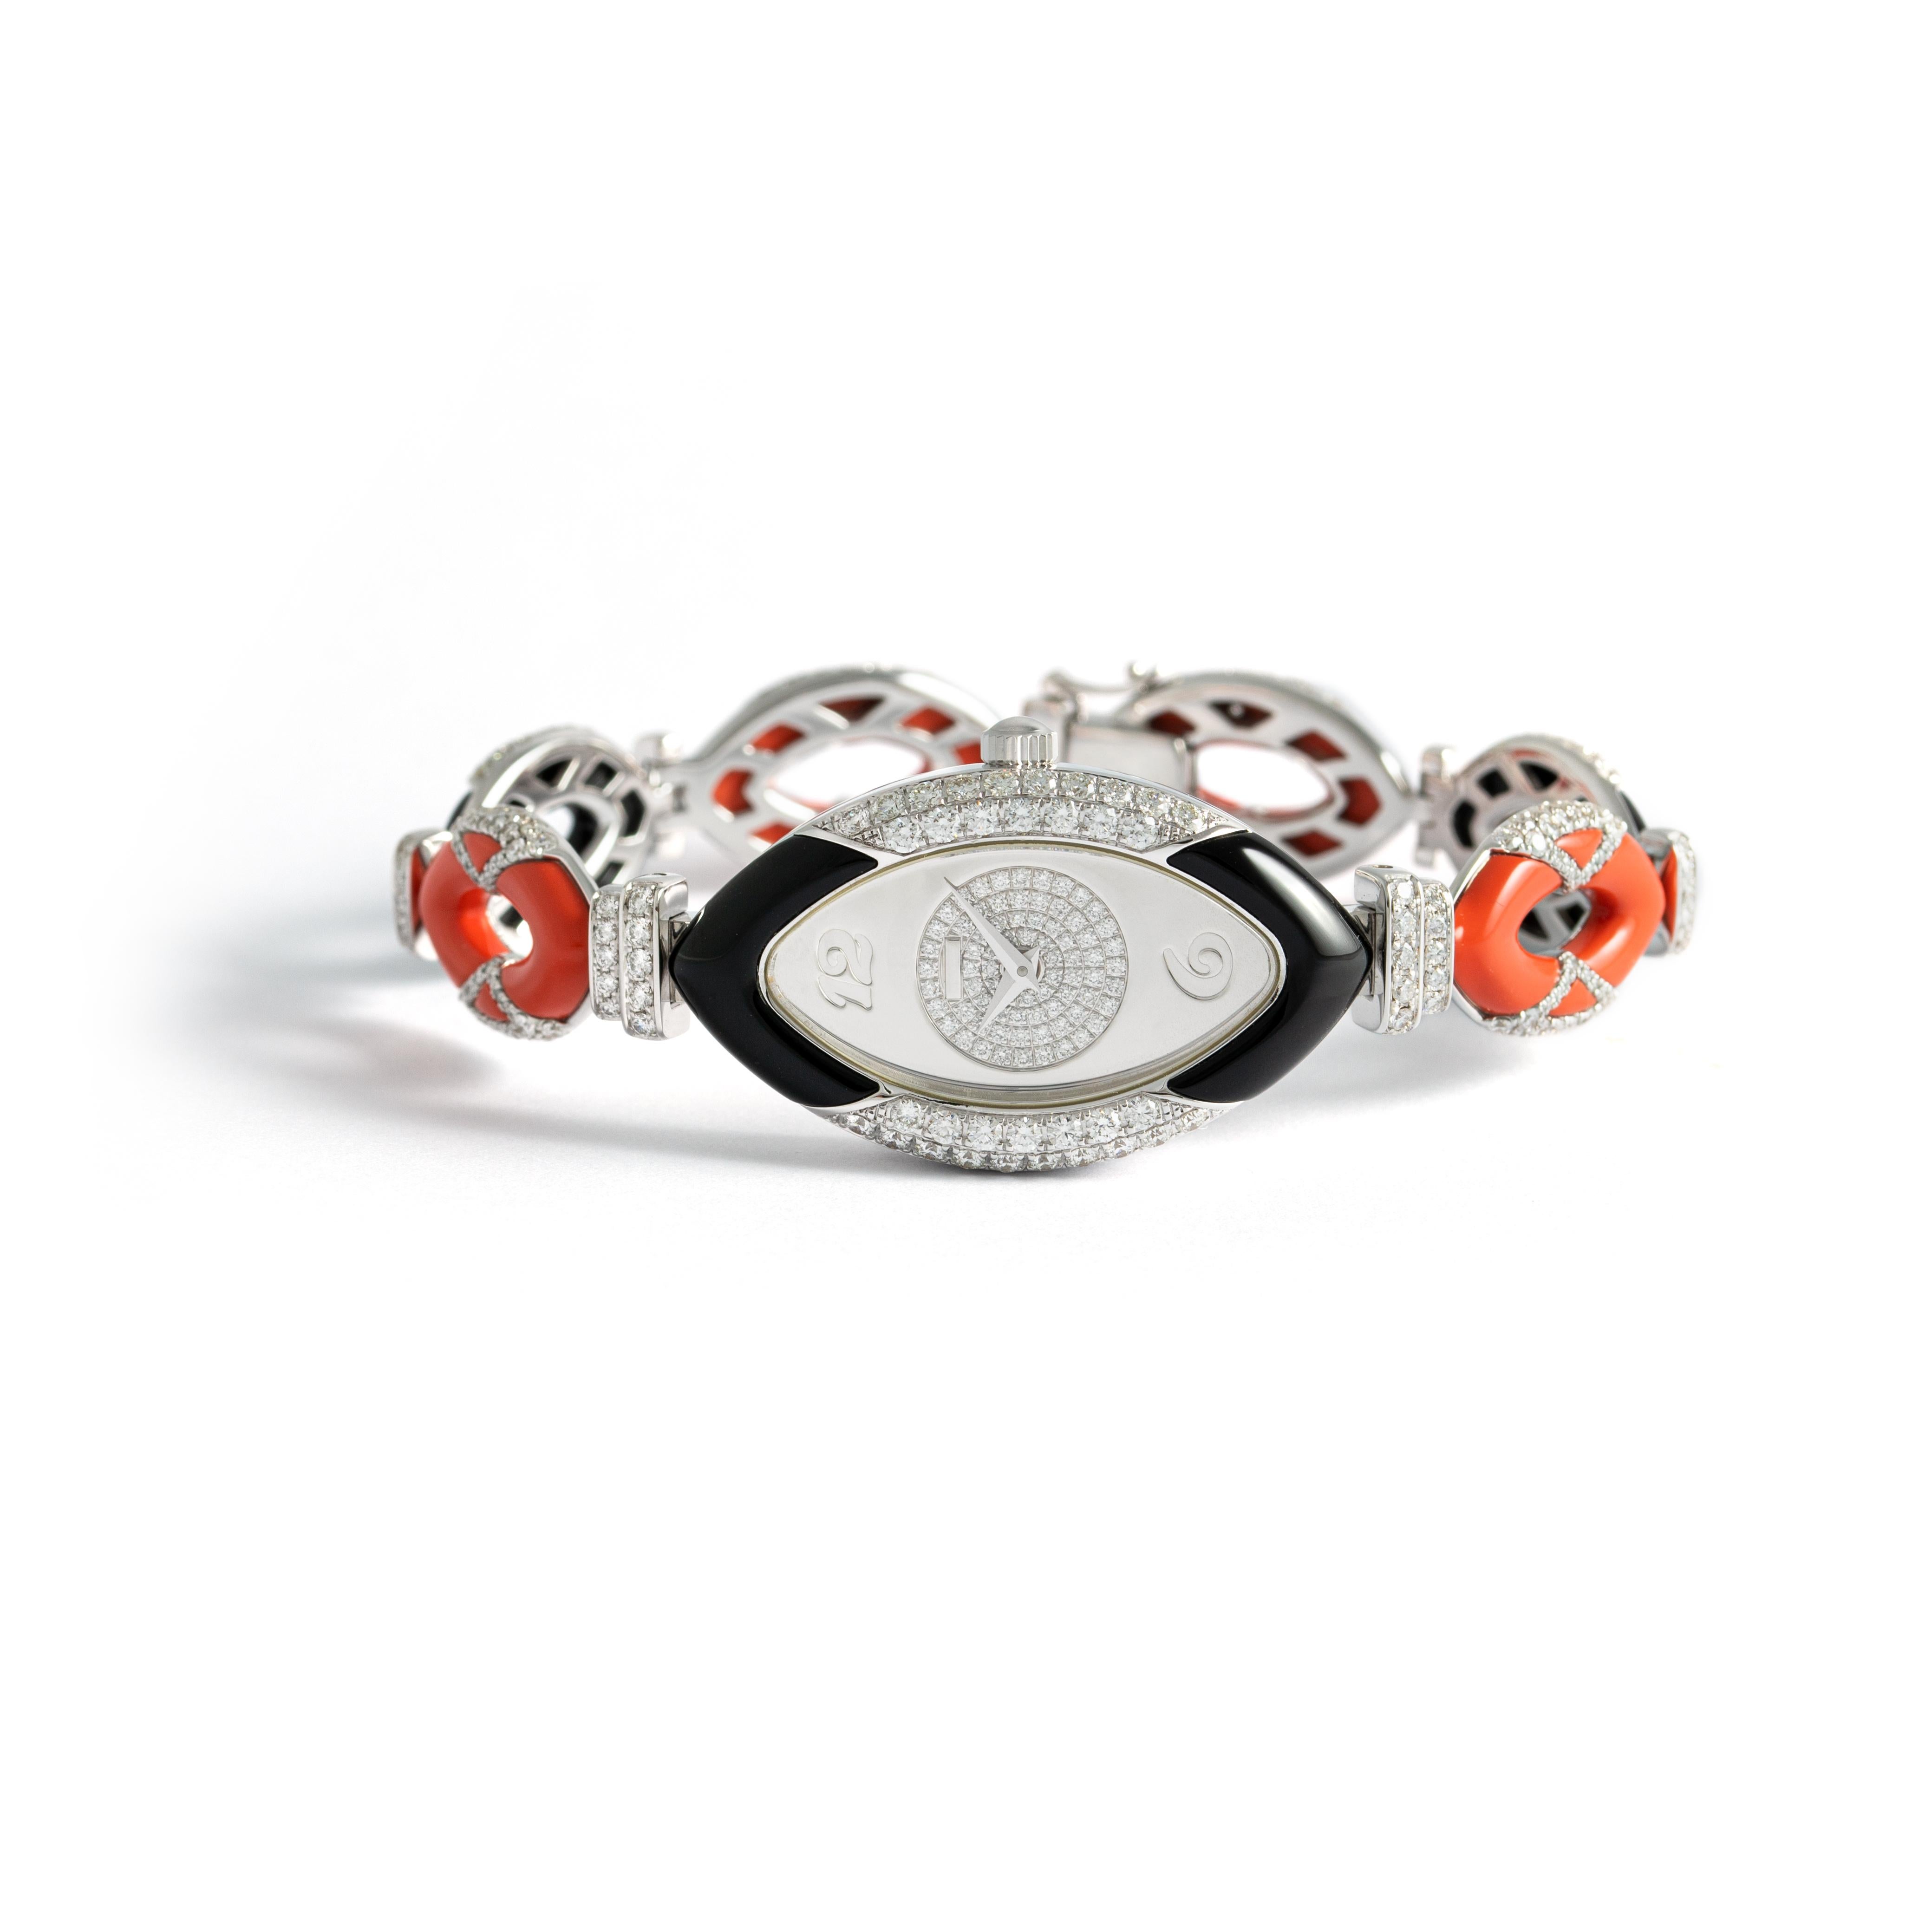 Watch in white gold 18kt set with 16 coral 7.64 cts, 10 onyx 7.48 cts case dial and bracelet set with 393 diamonds 3.41 cts quartz movement

Inner circumference: Approximately 16.64 centimeters ( 6.55 inches)

Total weight: 51.20 grams.

Width on